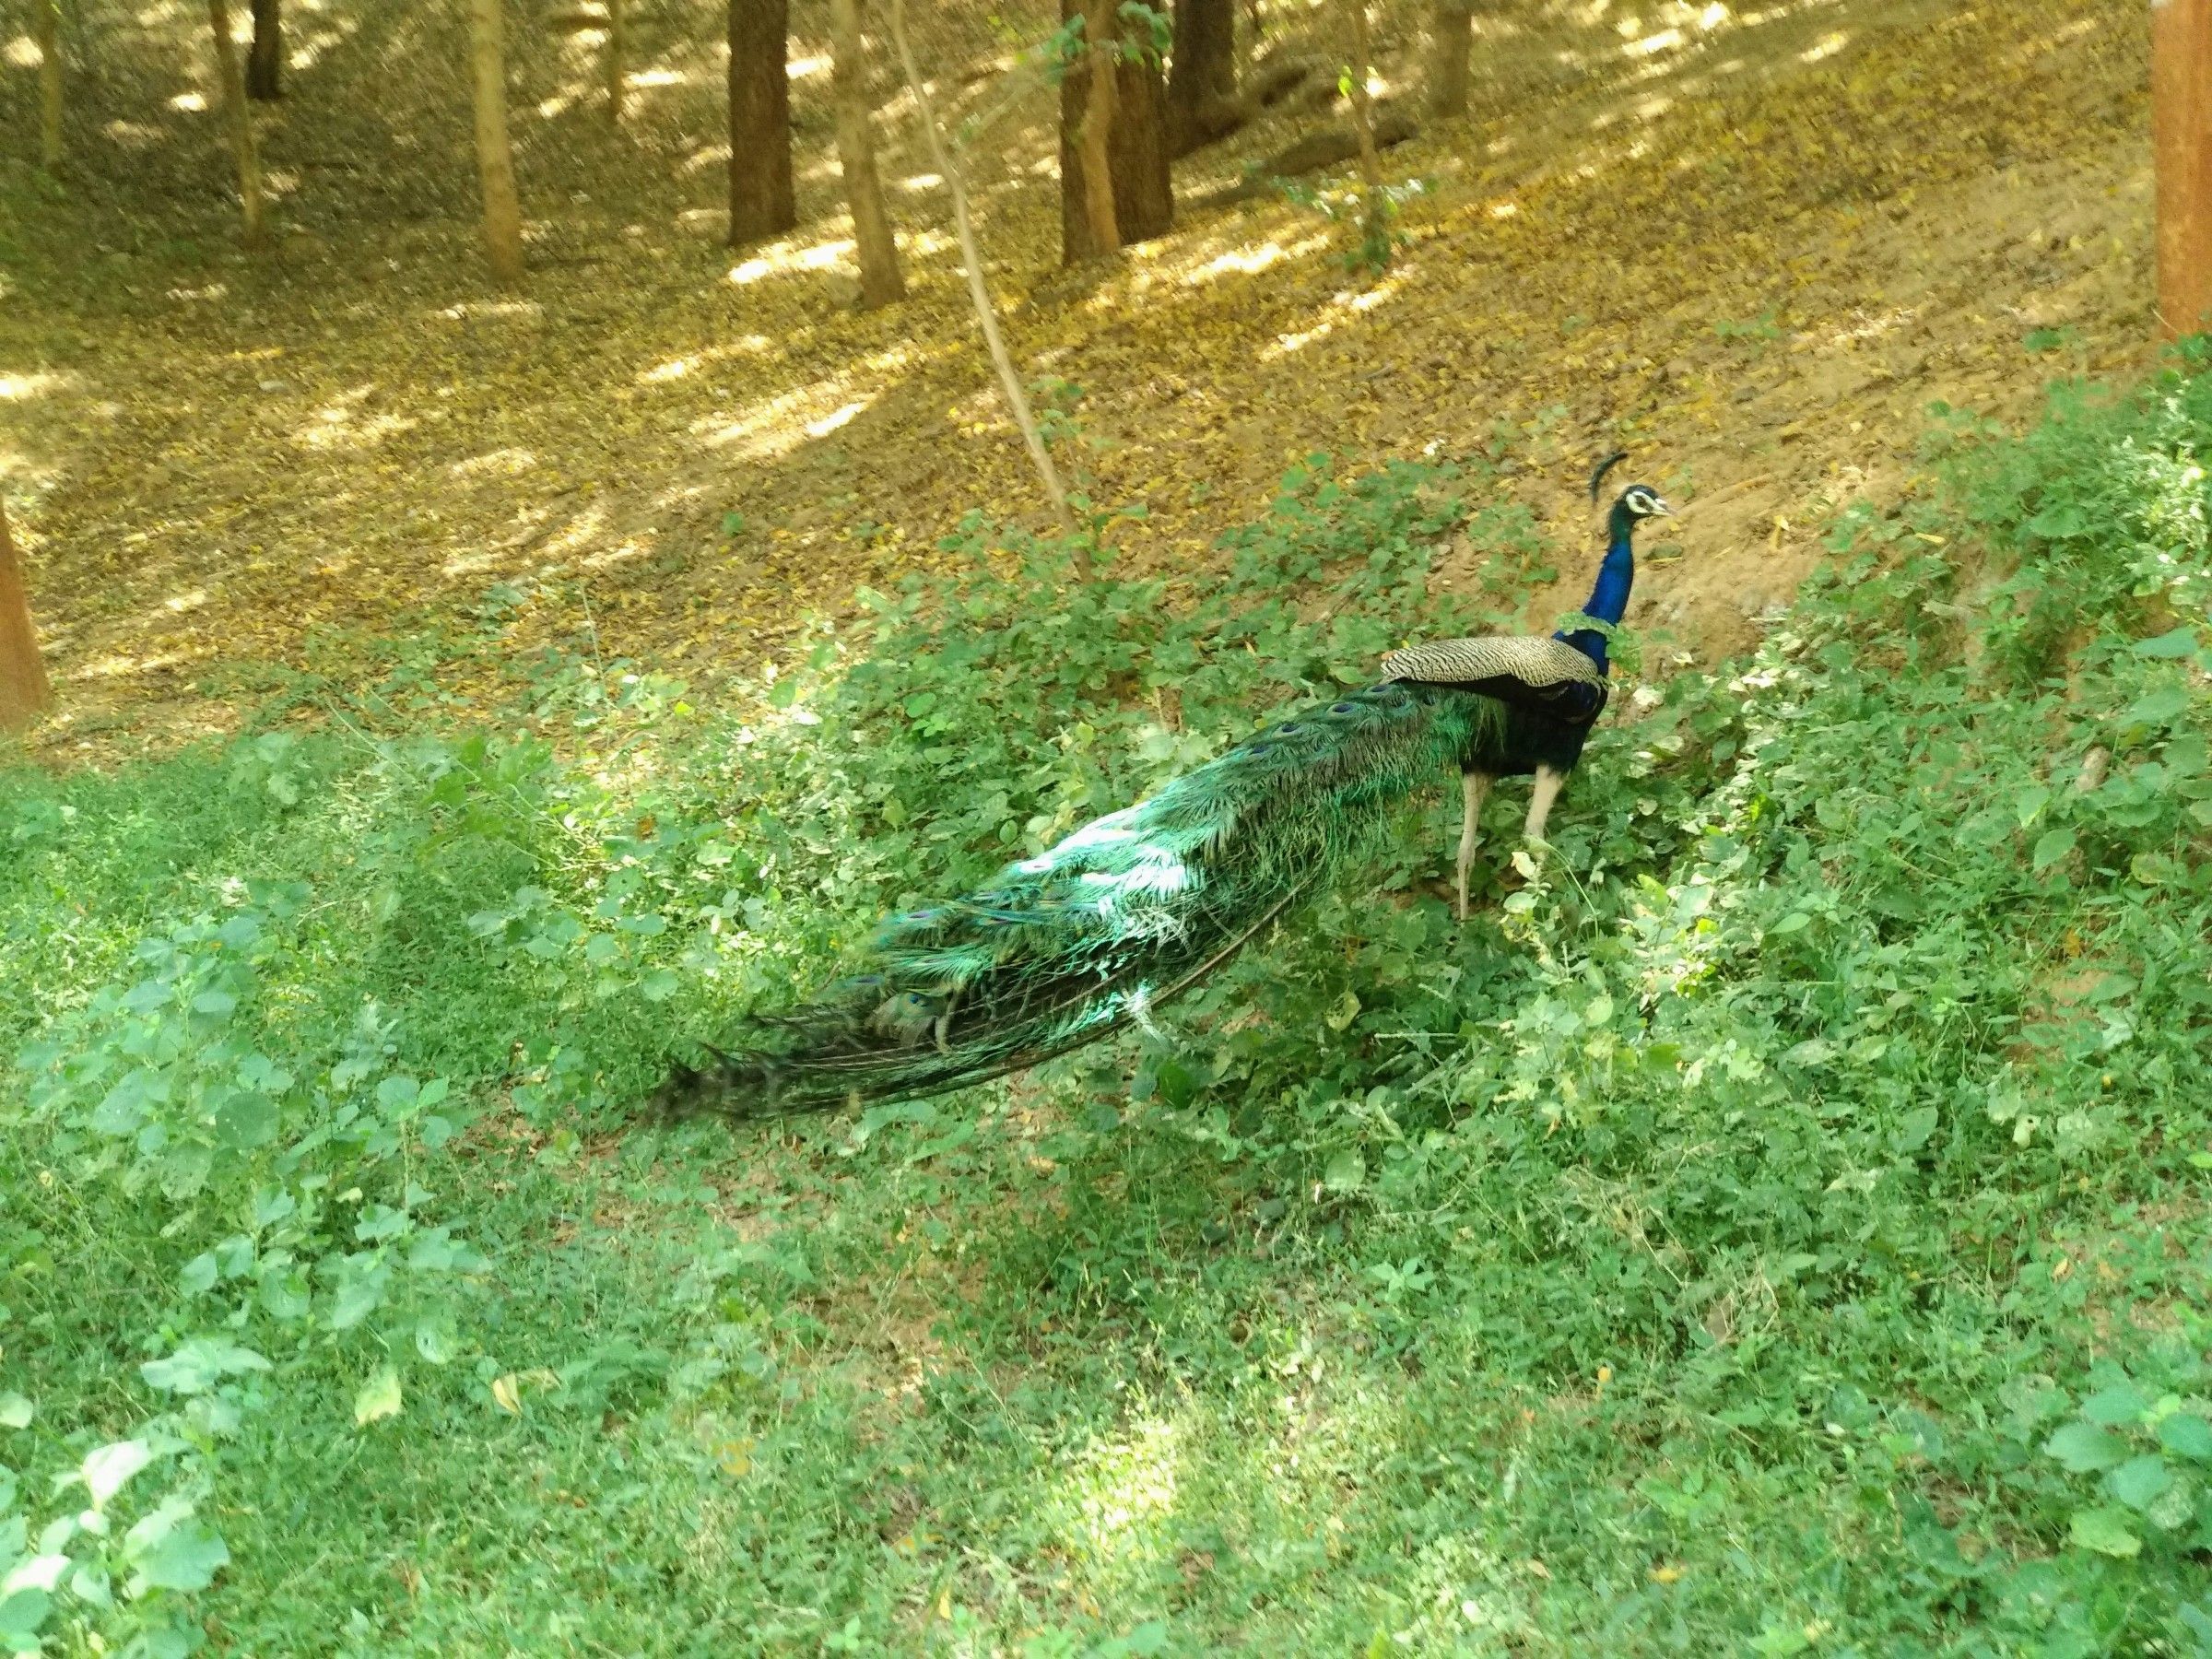 A picture of Indian National bird Peacock